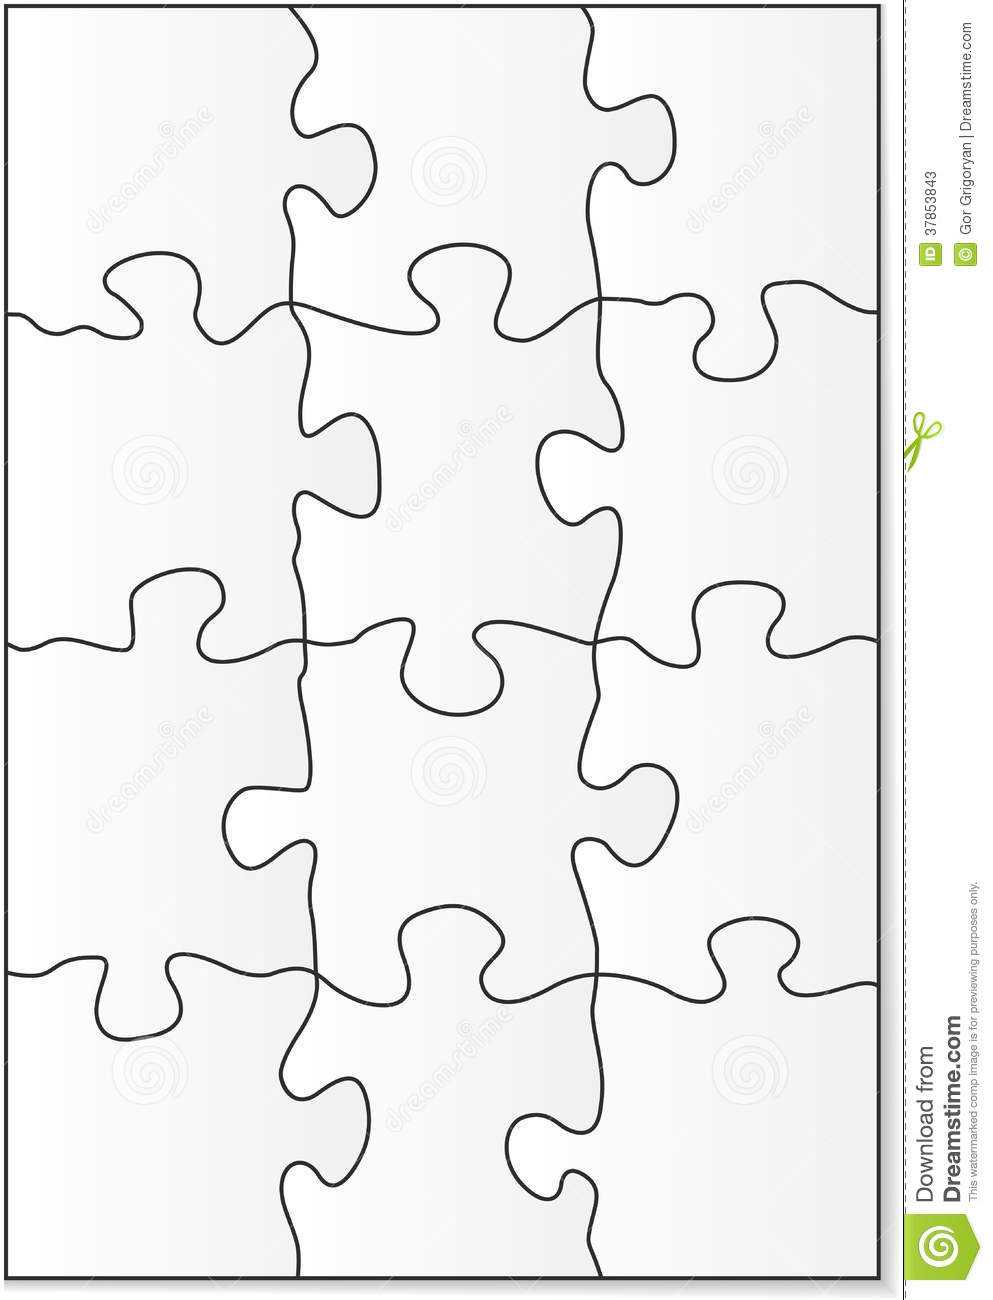 12 Piece Puzzle Template Stock Vector. Illustration Of Frame For Blank Jigsaw Piece Template